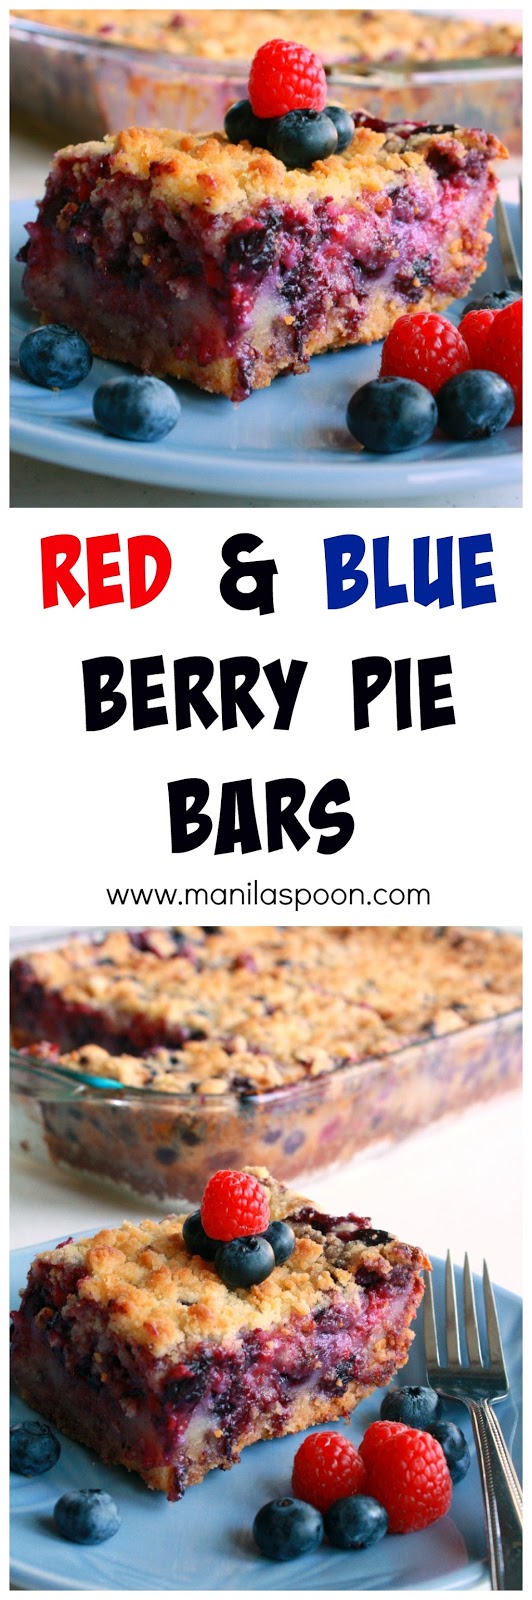 Full of fruity deliciousness are these Red and Blue Berry Pie Bars that are perfect for any special gathering or summer party! Tried and tested crowd-pleaser!